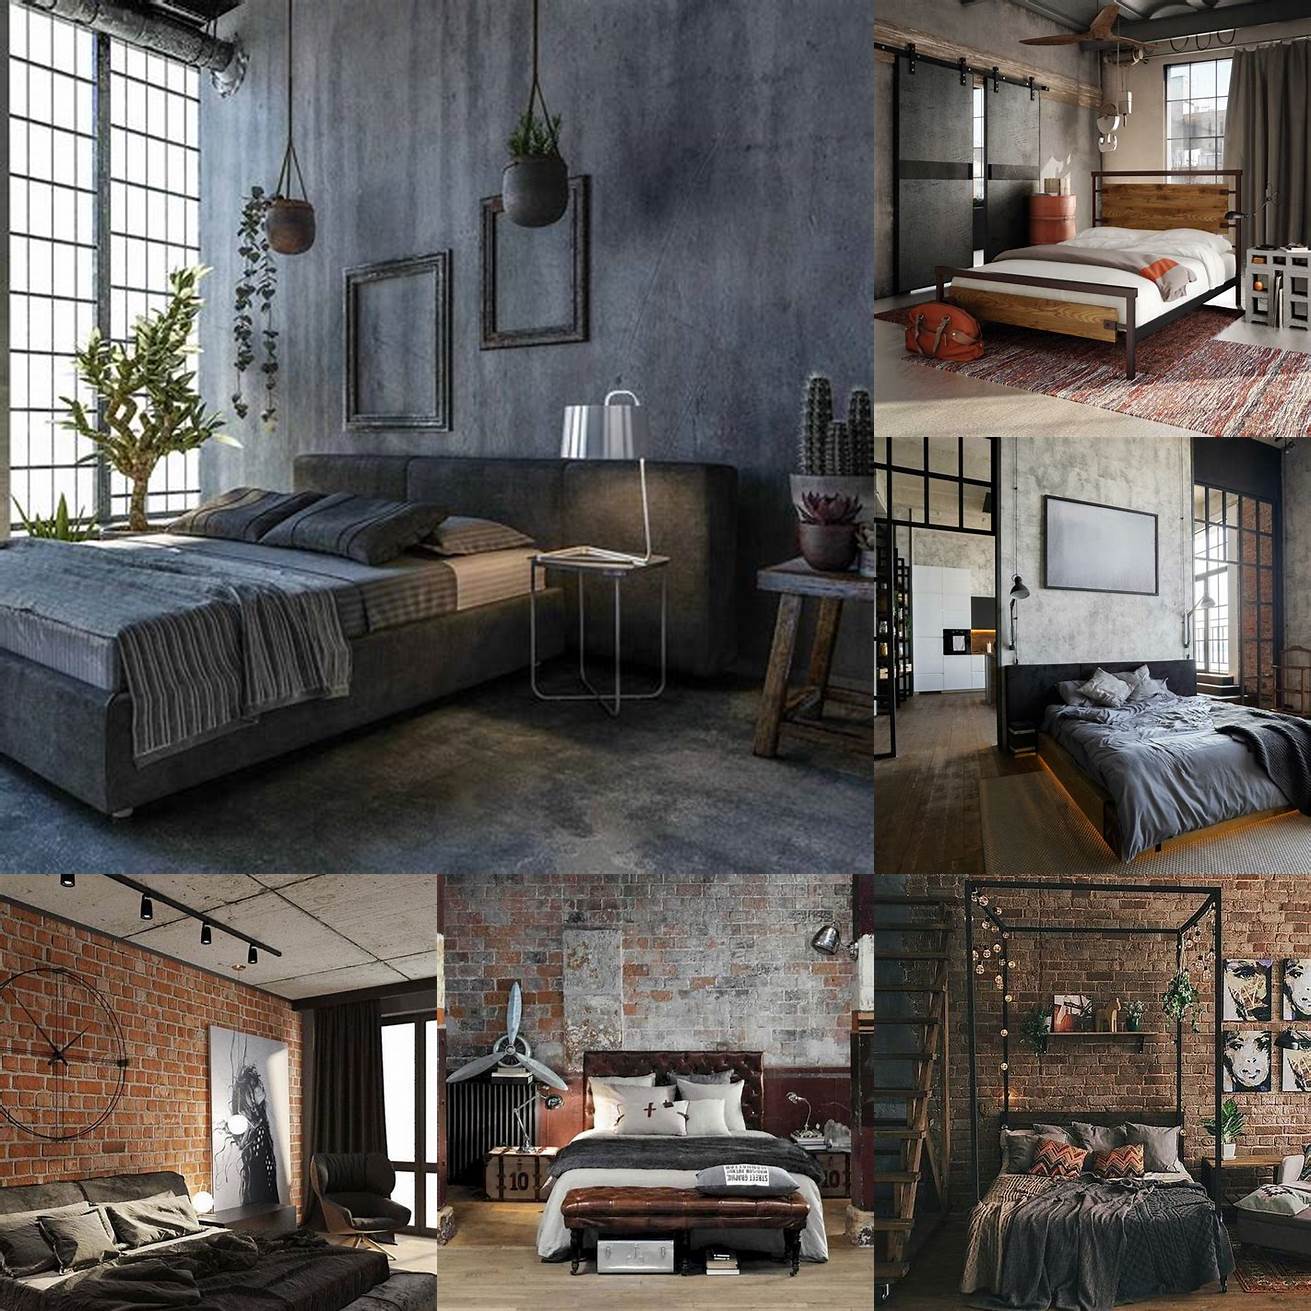 Image of an industrial style bedroom with a metal bed frame and concrete nightstands